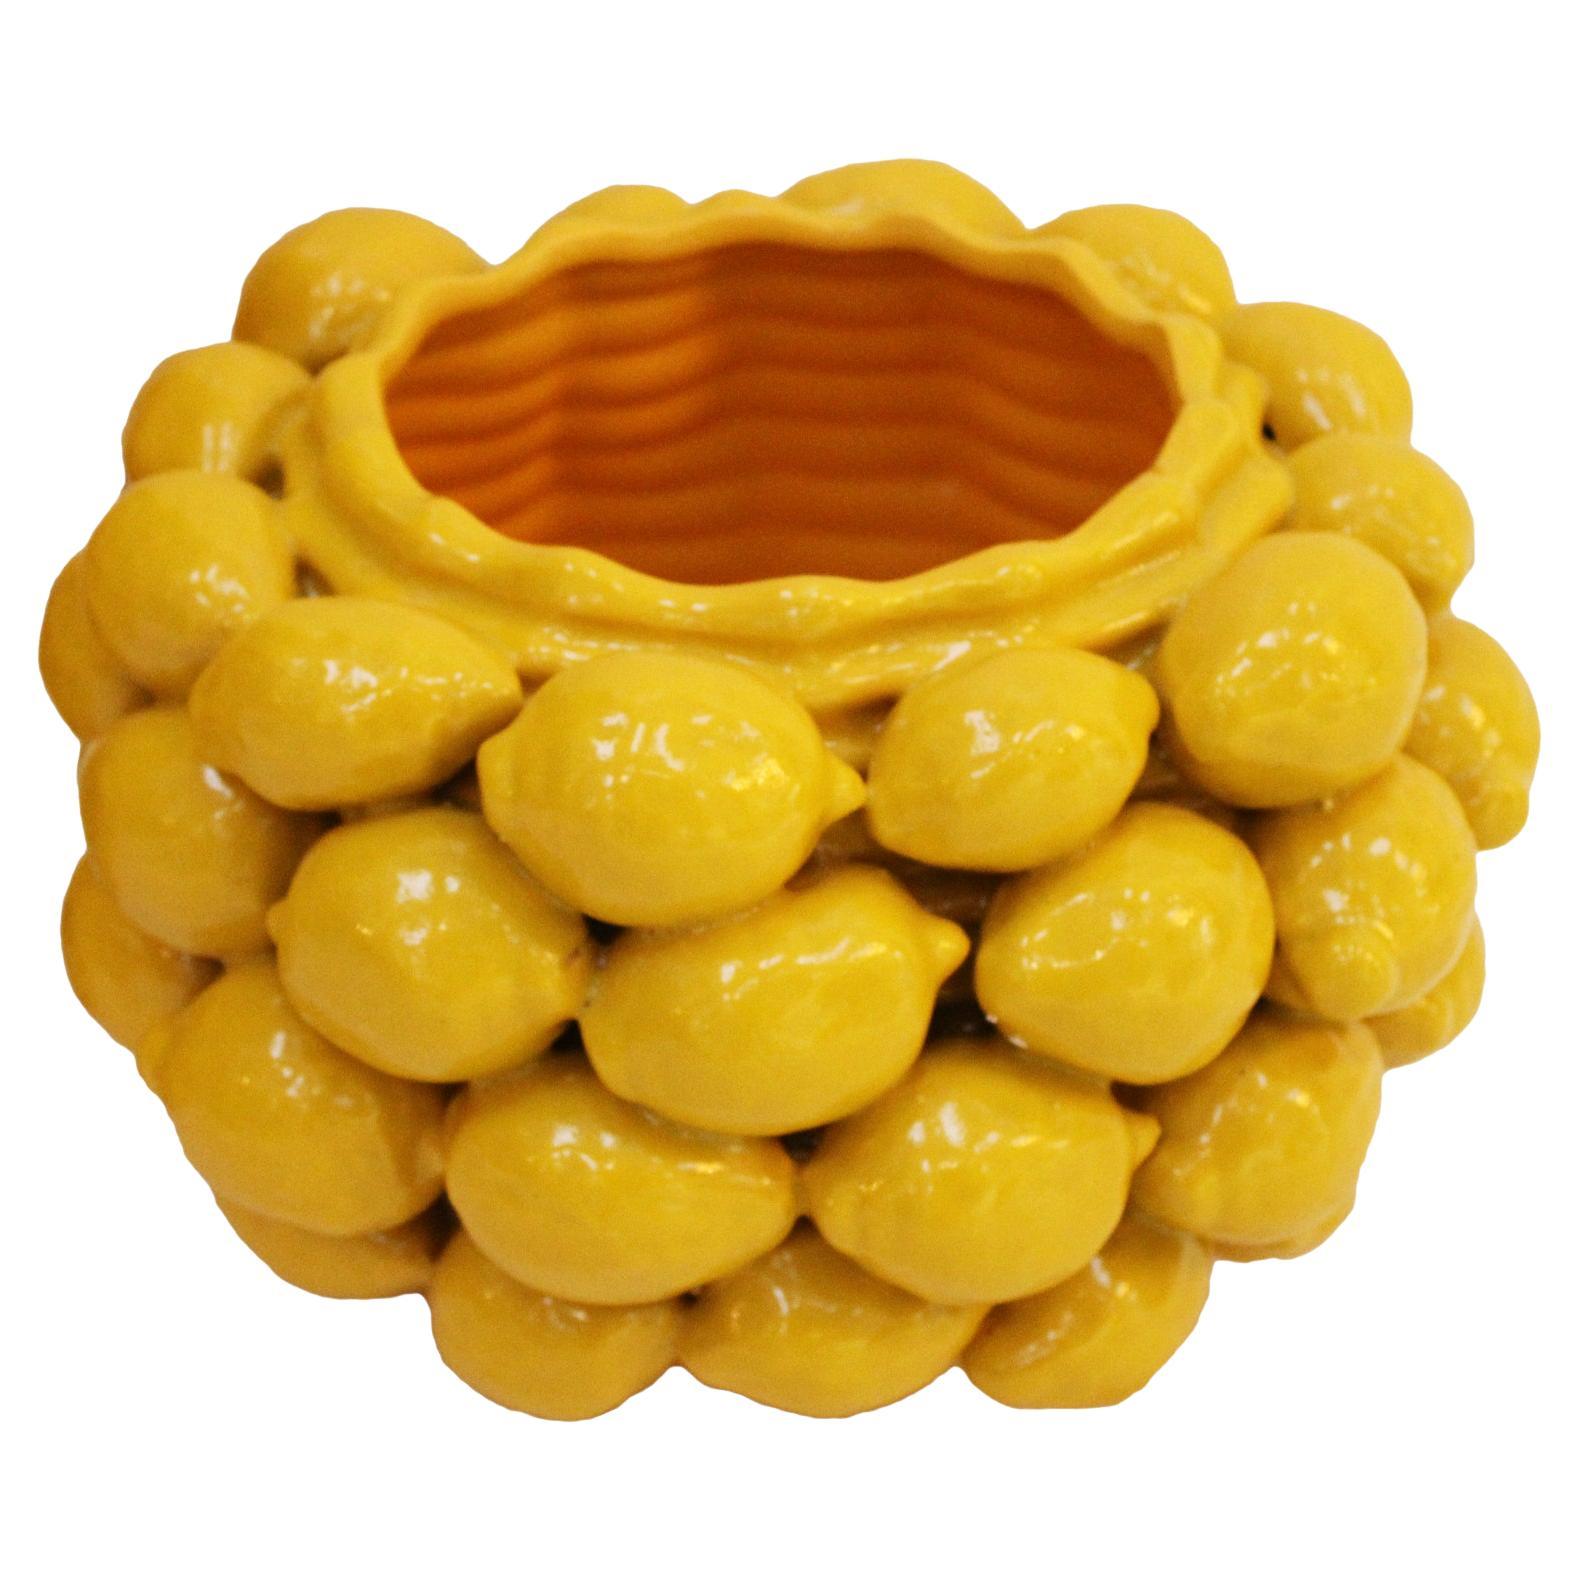 Contemporary Italian Ceramic Yellow Rounded Vase with Fruit Motifs